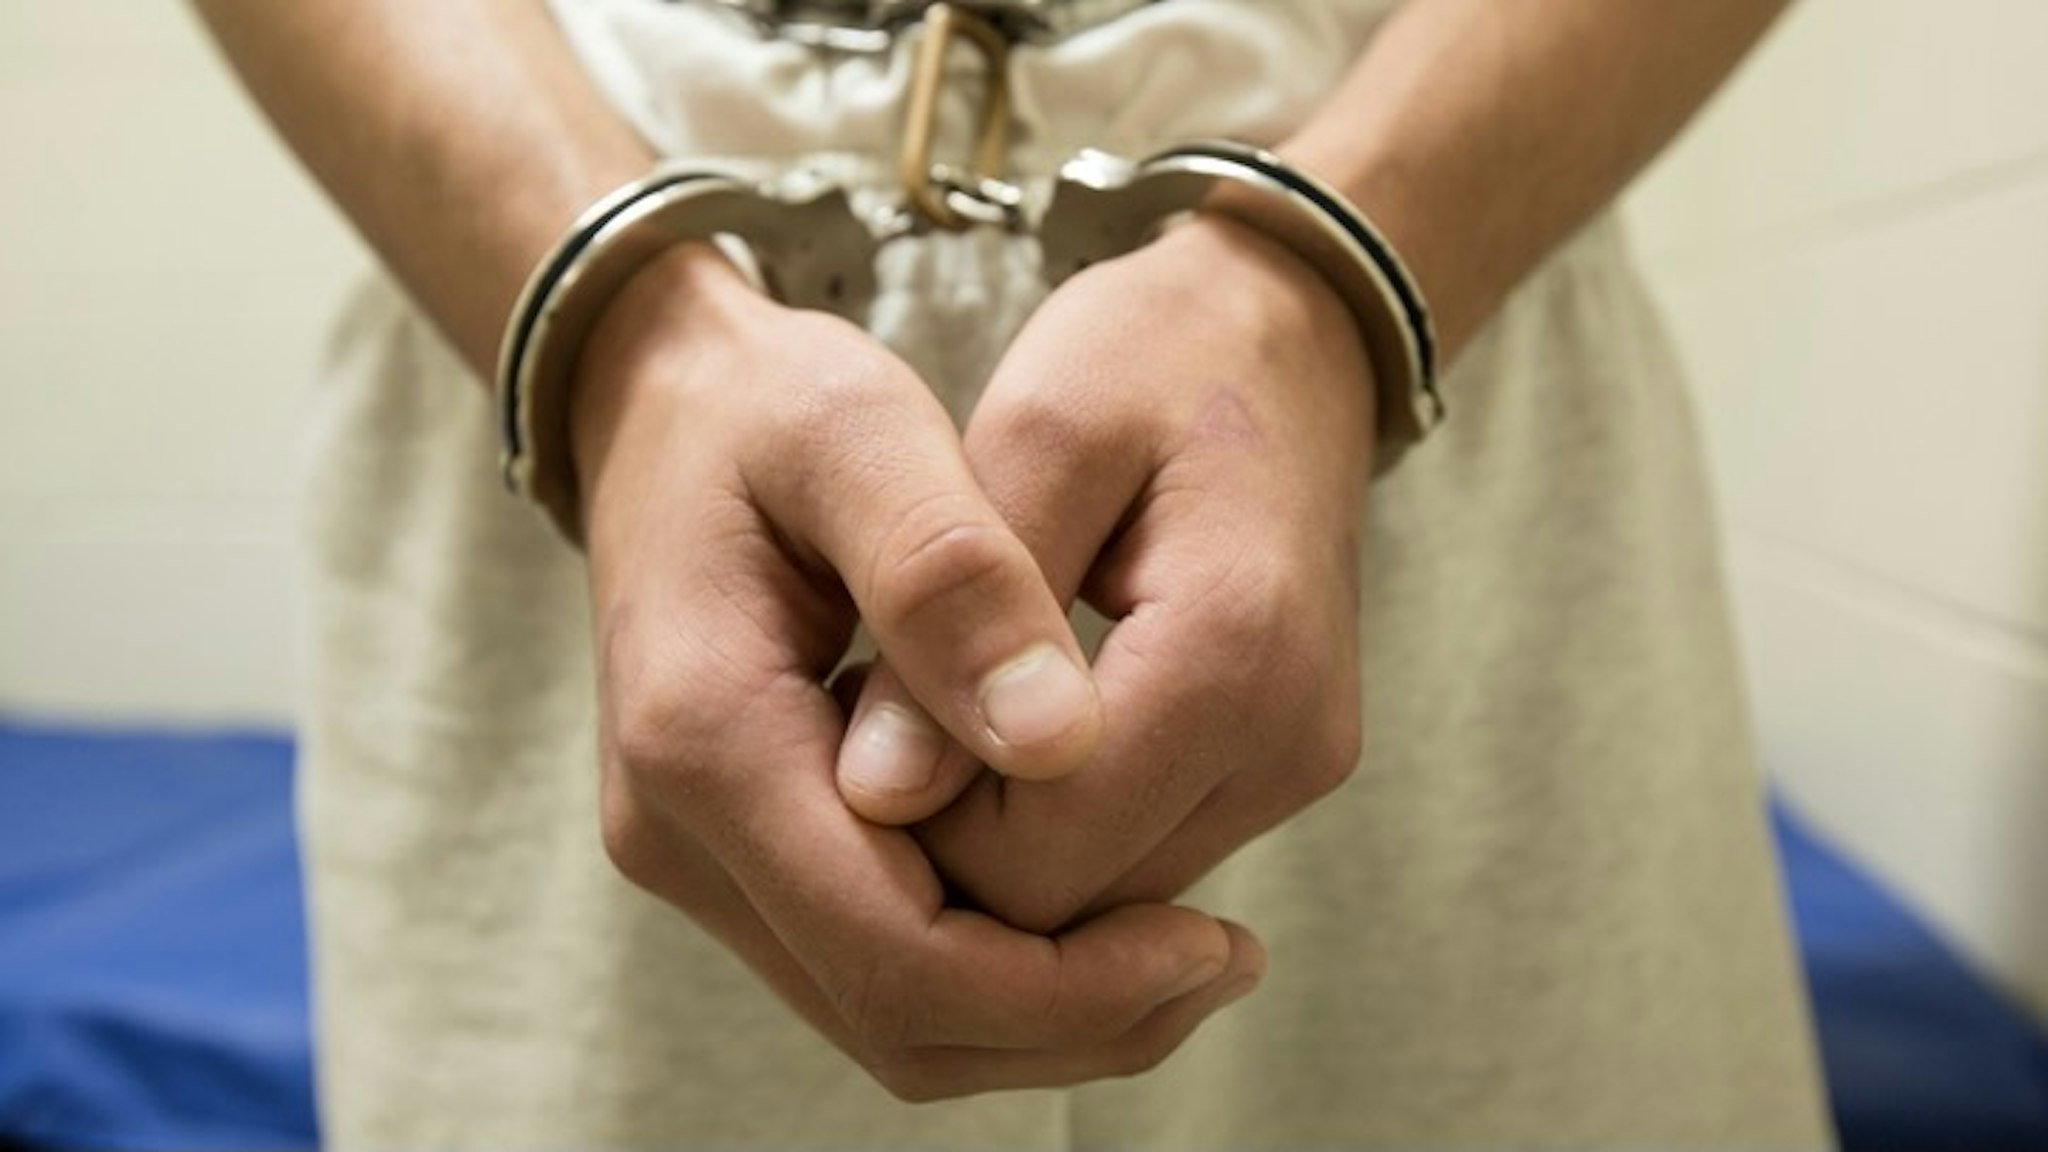 Teenage boy in shackles - stock photo Richard Ross via Getty Images